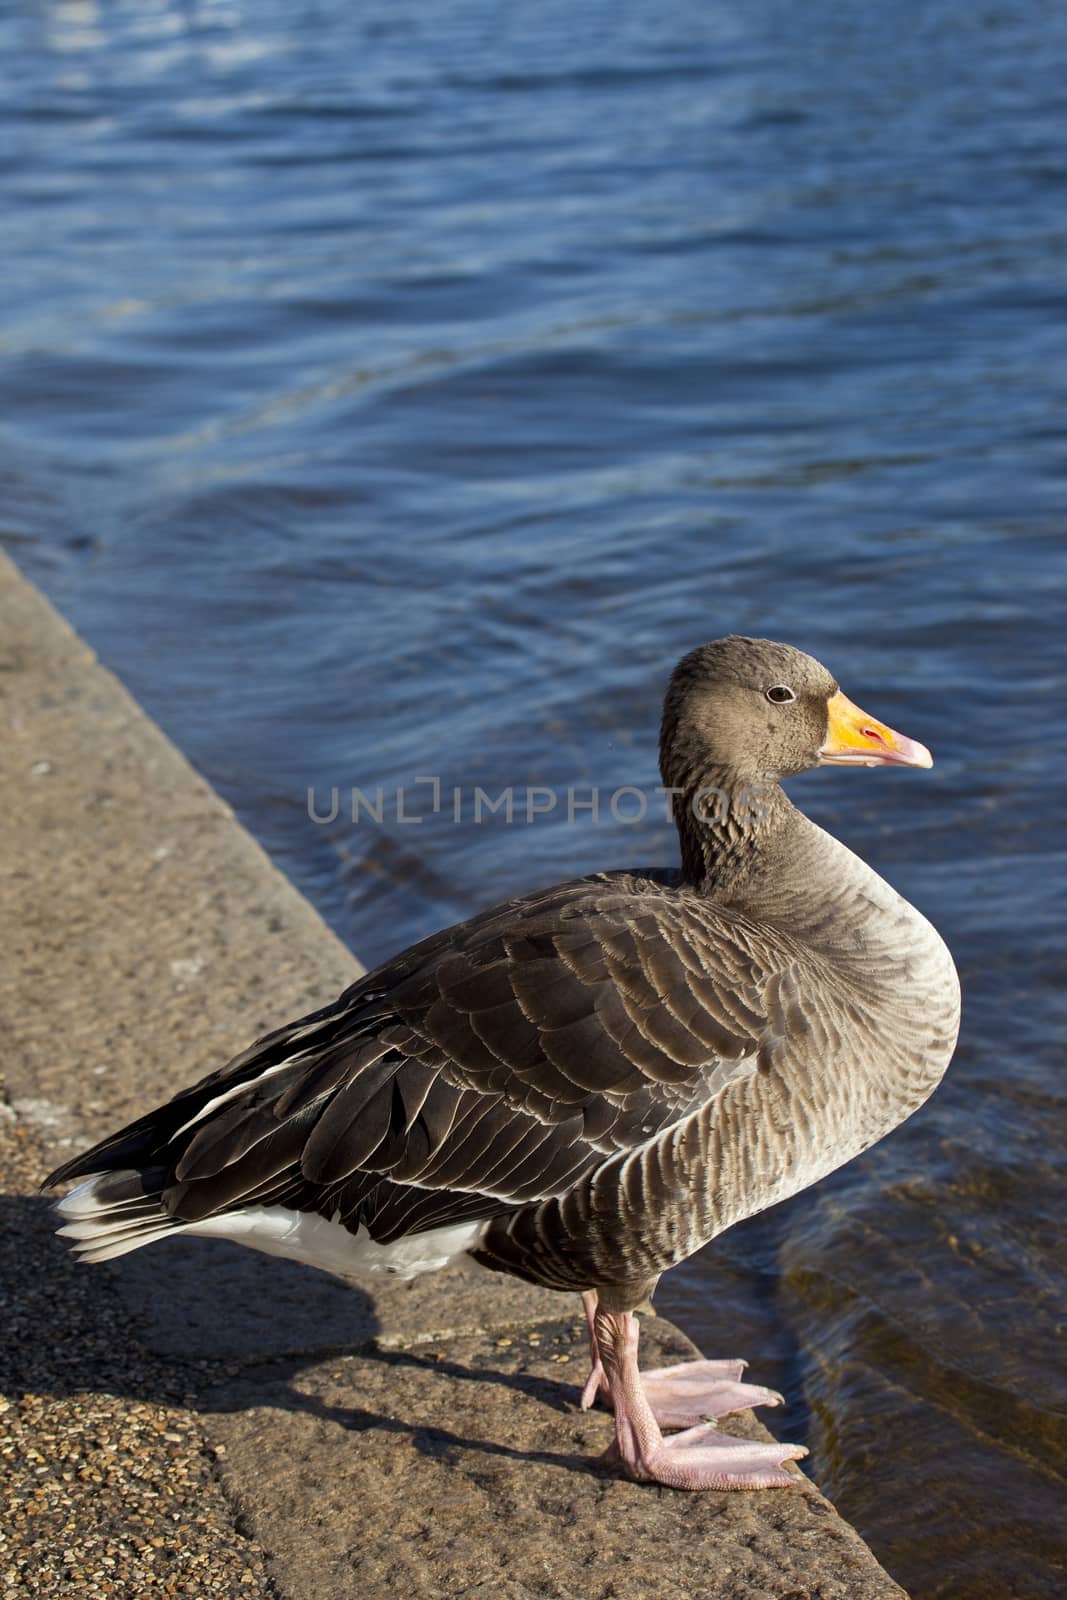 A duck sitting by the Serpentine in Hyde Park.